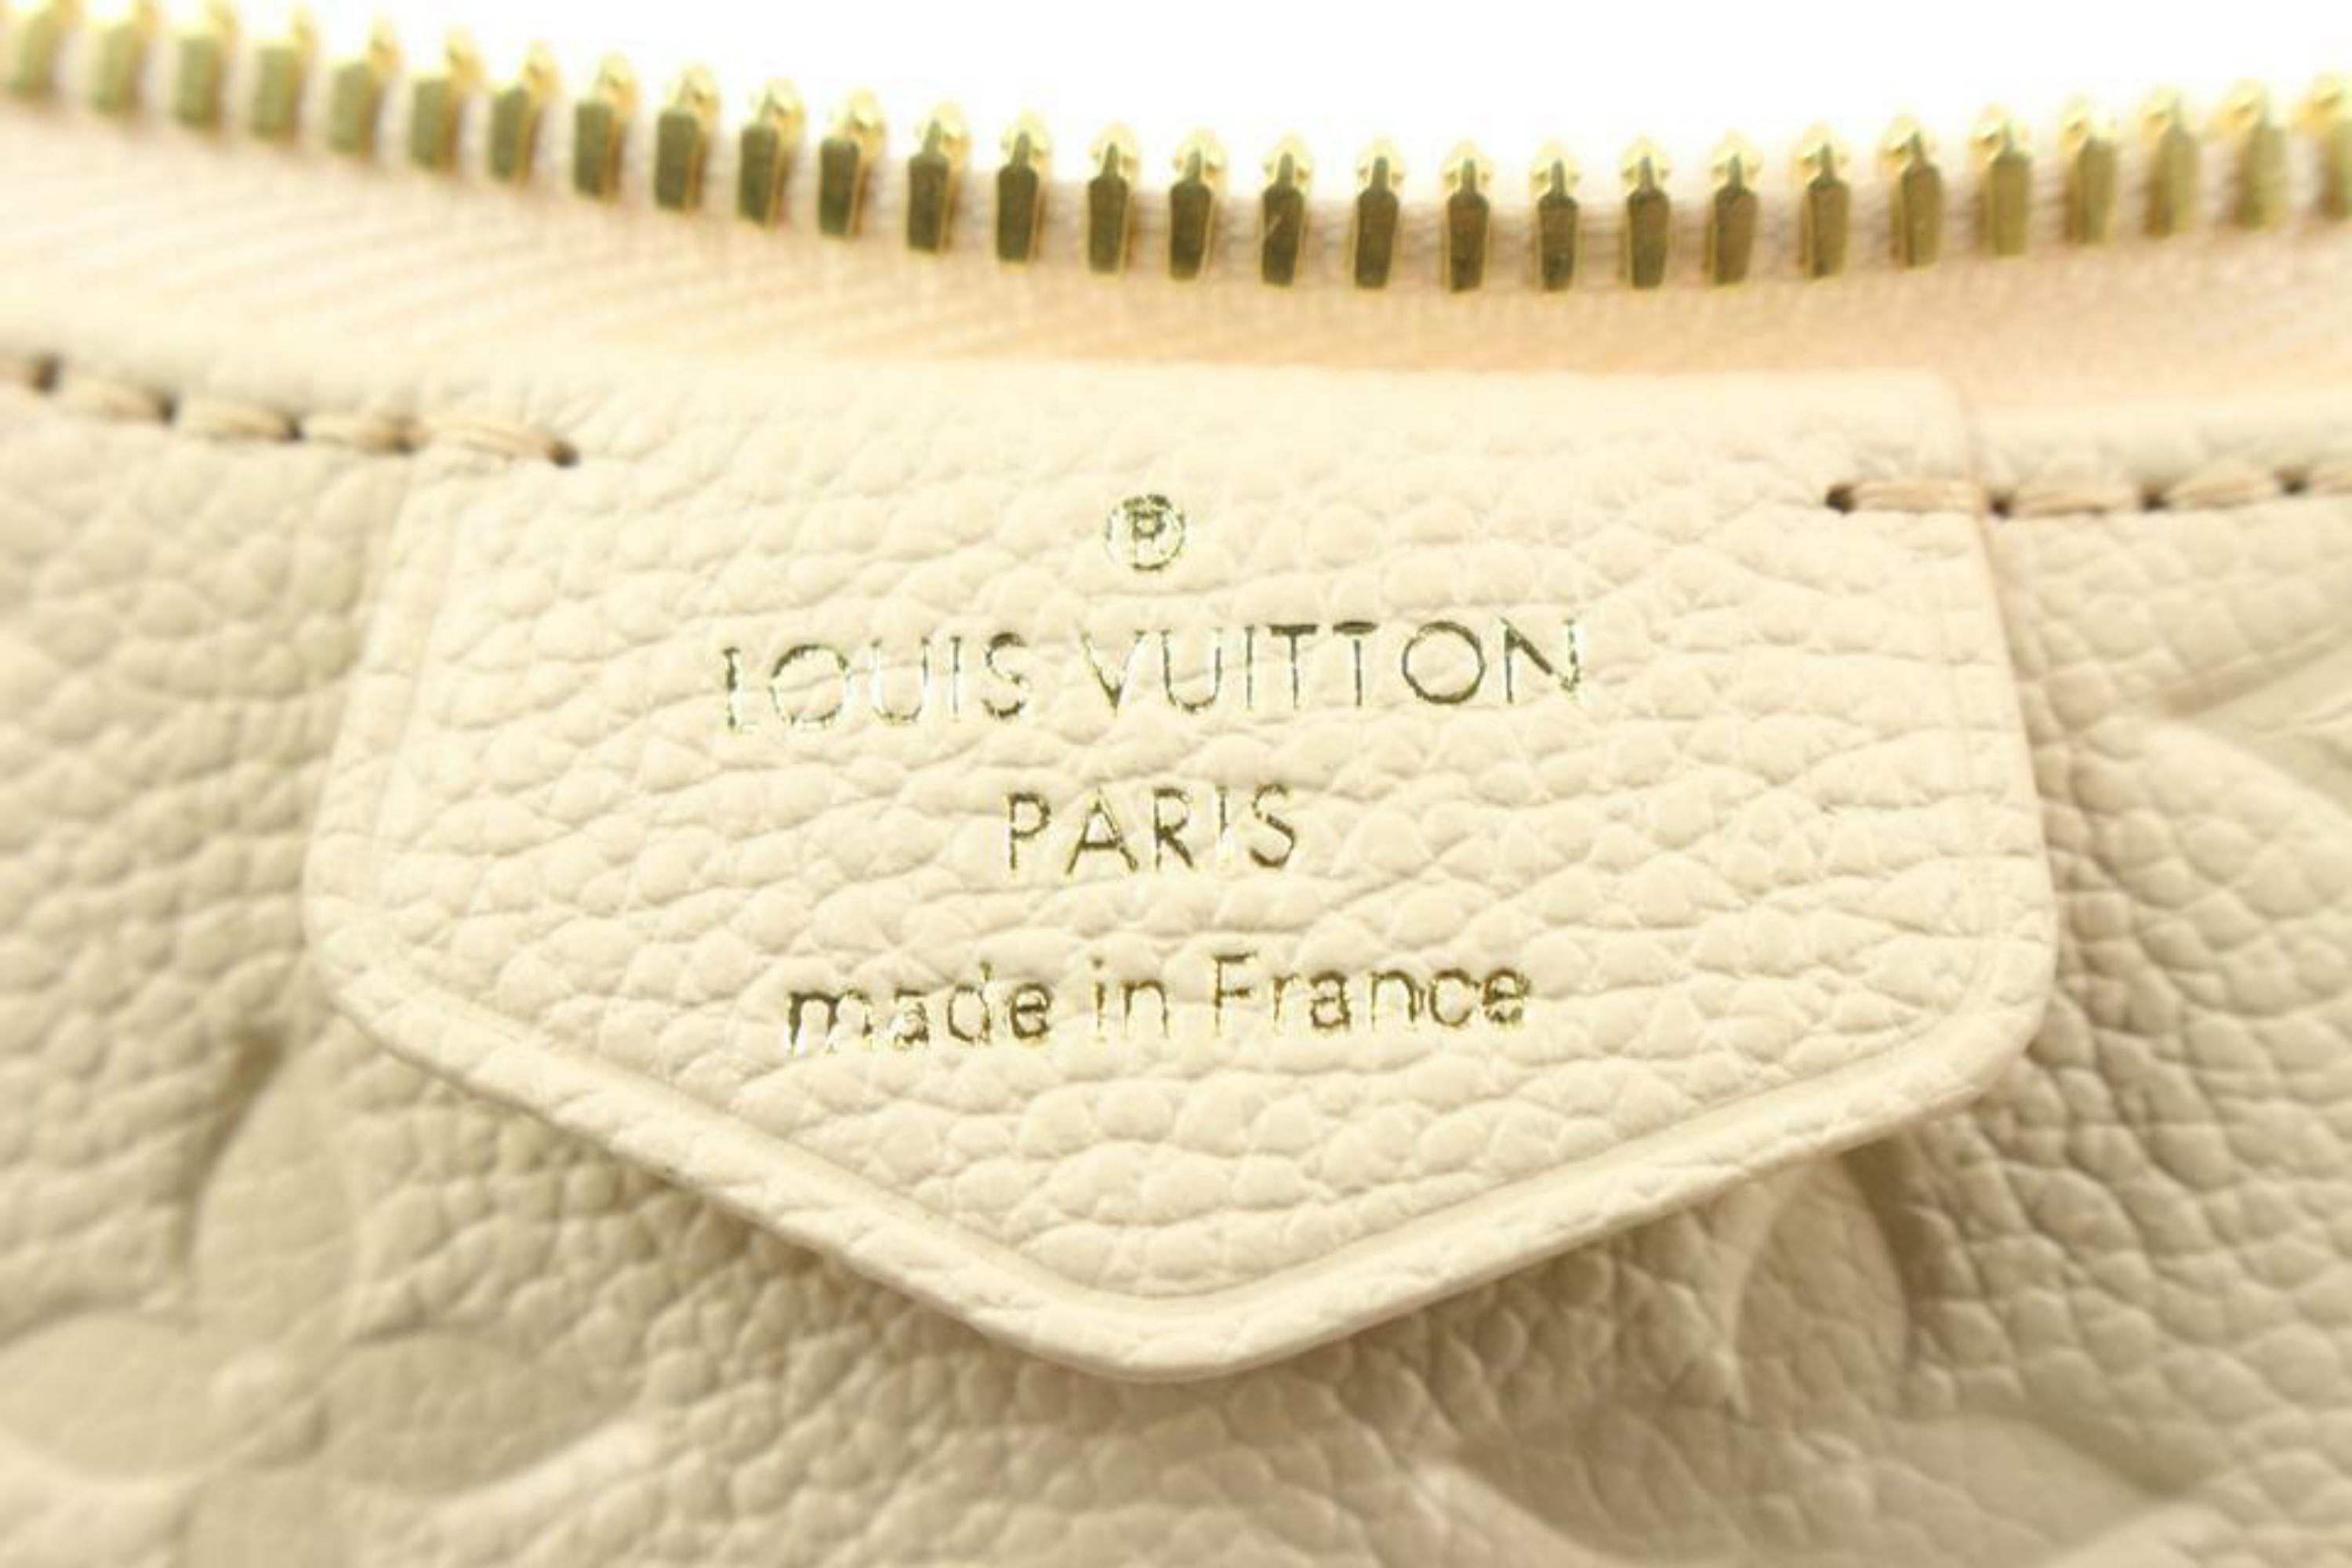 Louis Vuitton Cream Monogram Empreinte Easy Pouch on Strap Crossbody 1LV1114a
Date Code/Serial Number: Rfid Chip
Made In: France
Measurements: Length:  8